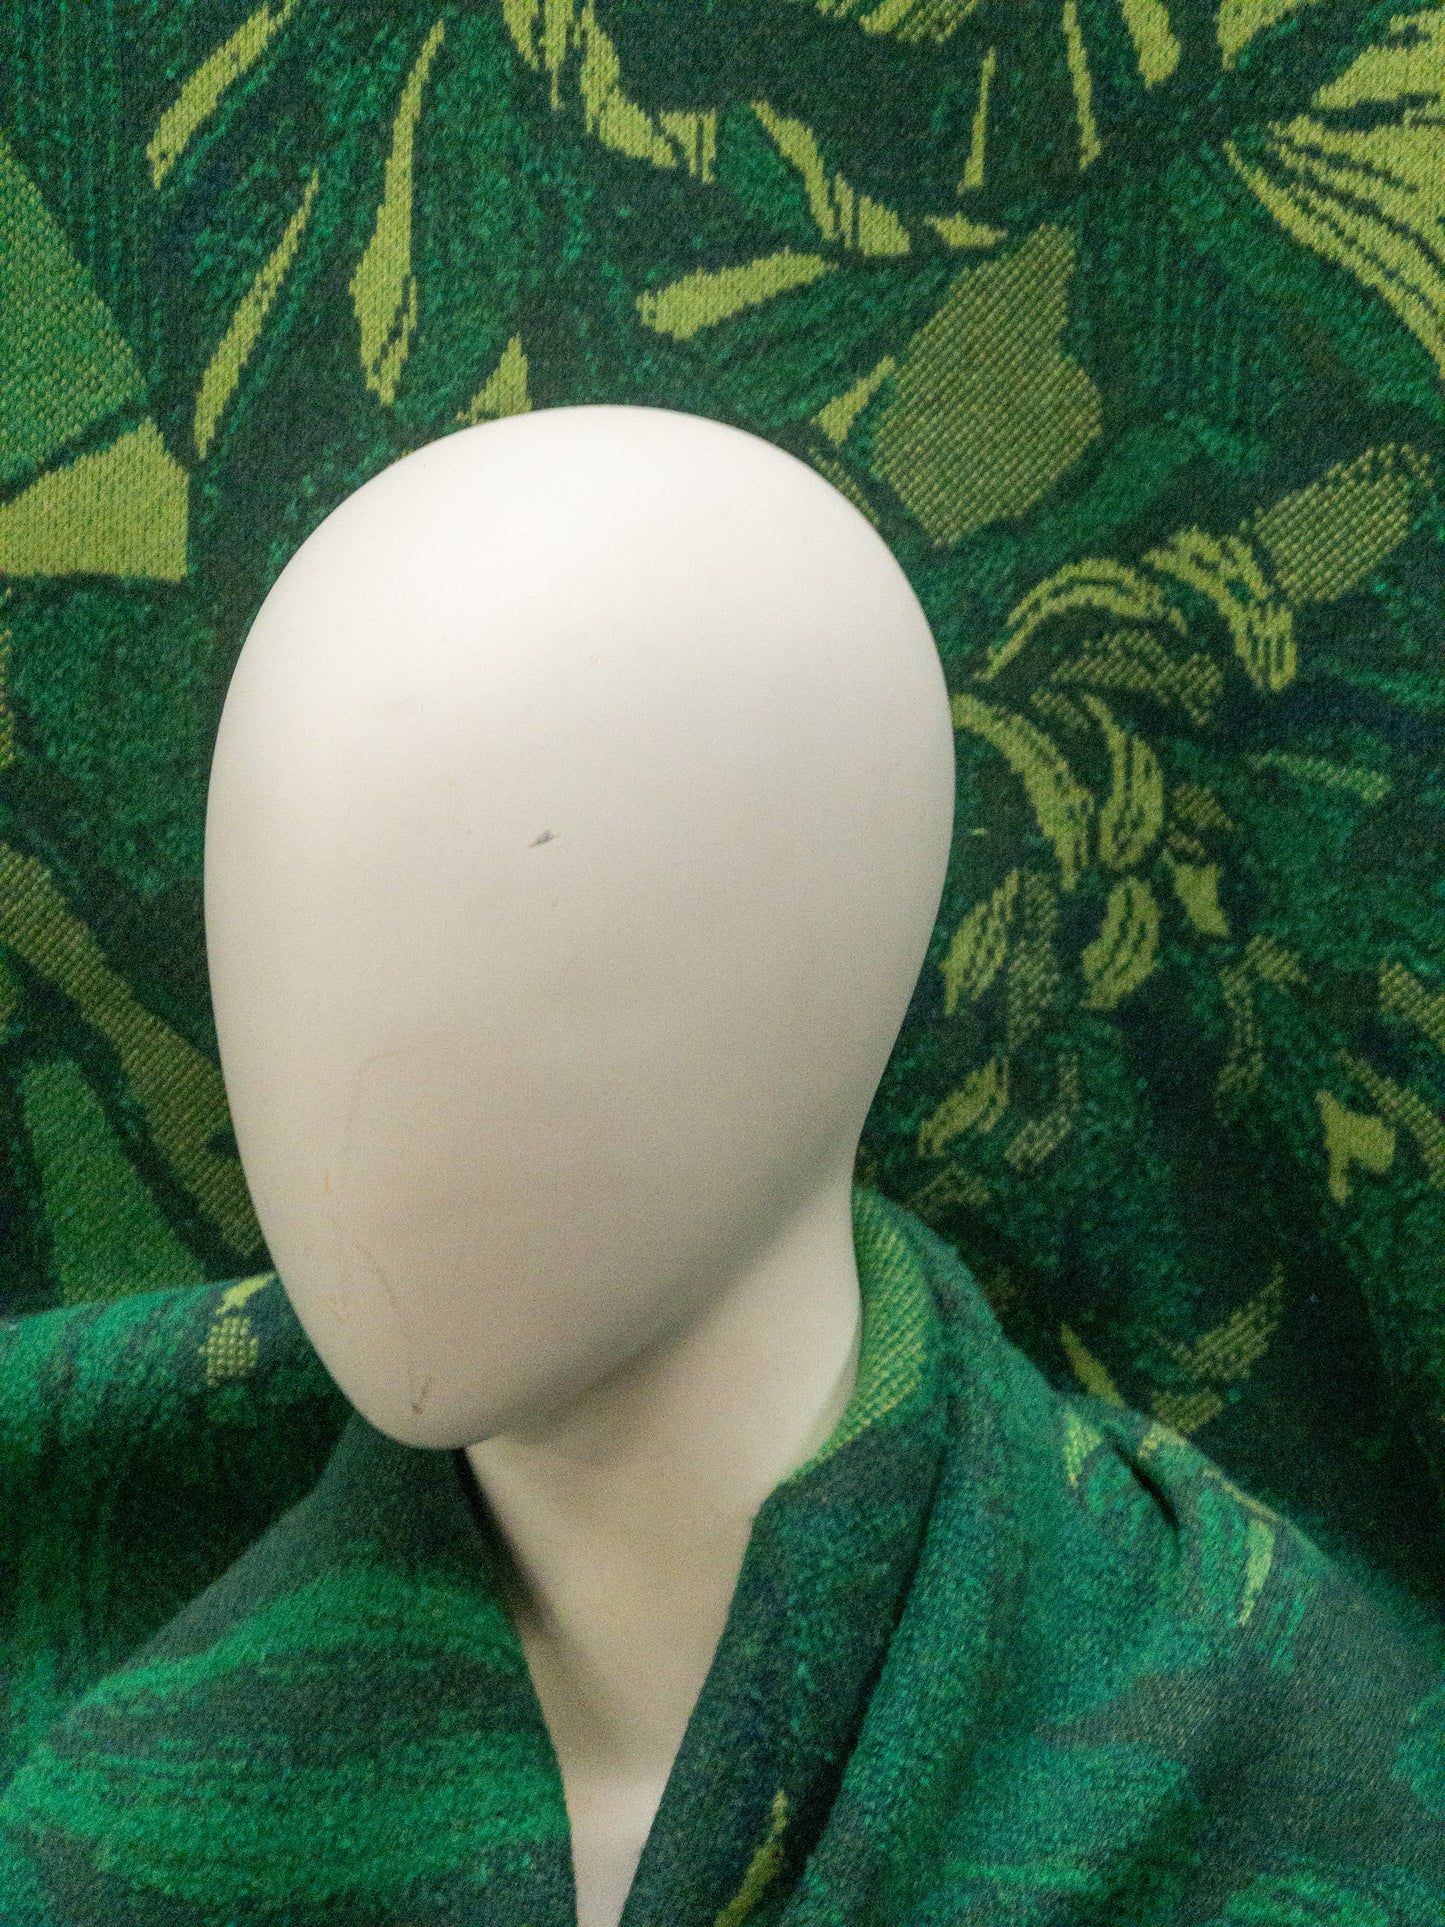 Exclusive Jaquard Knit in green botanical garden